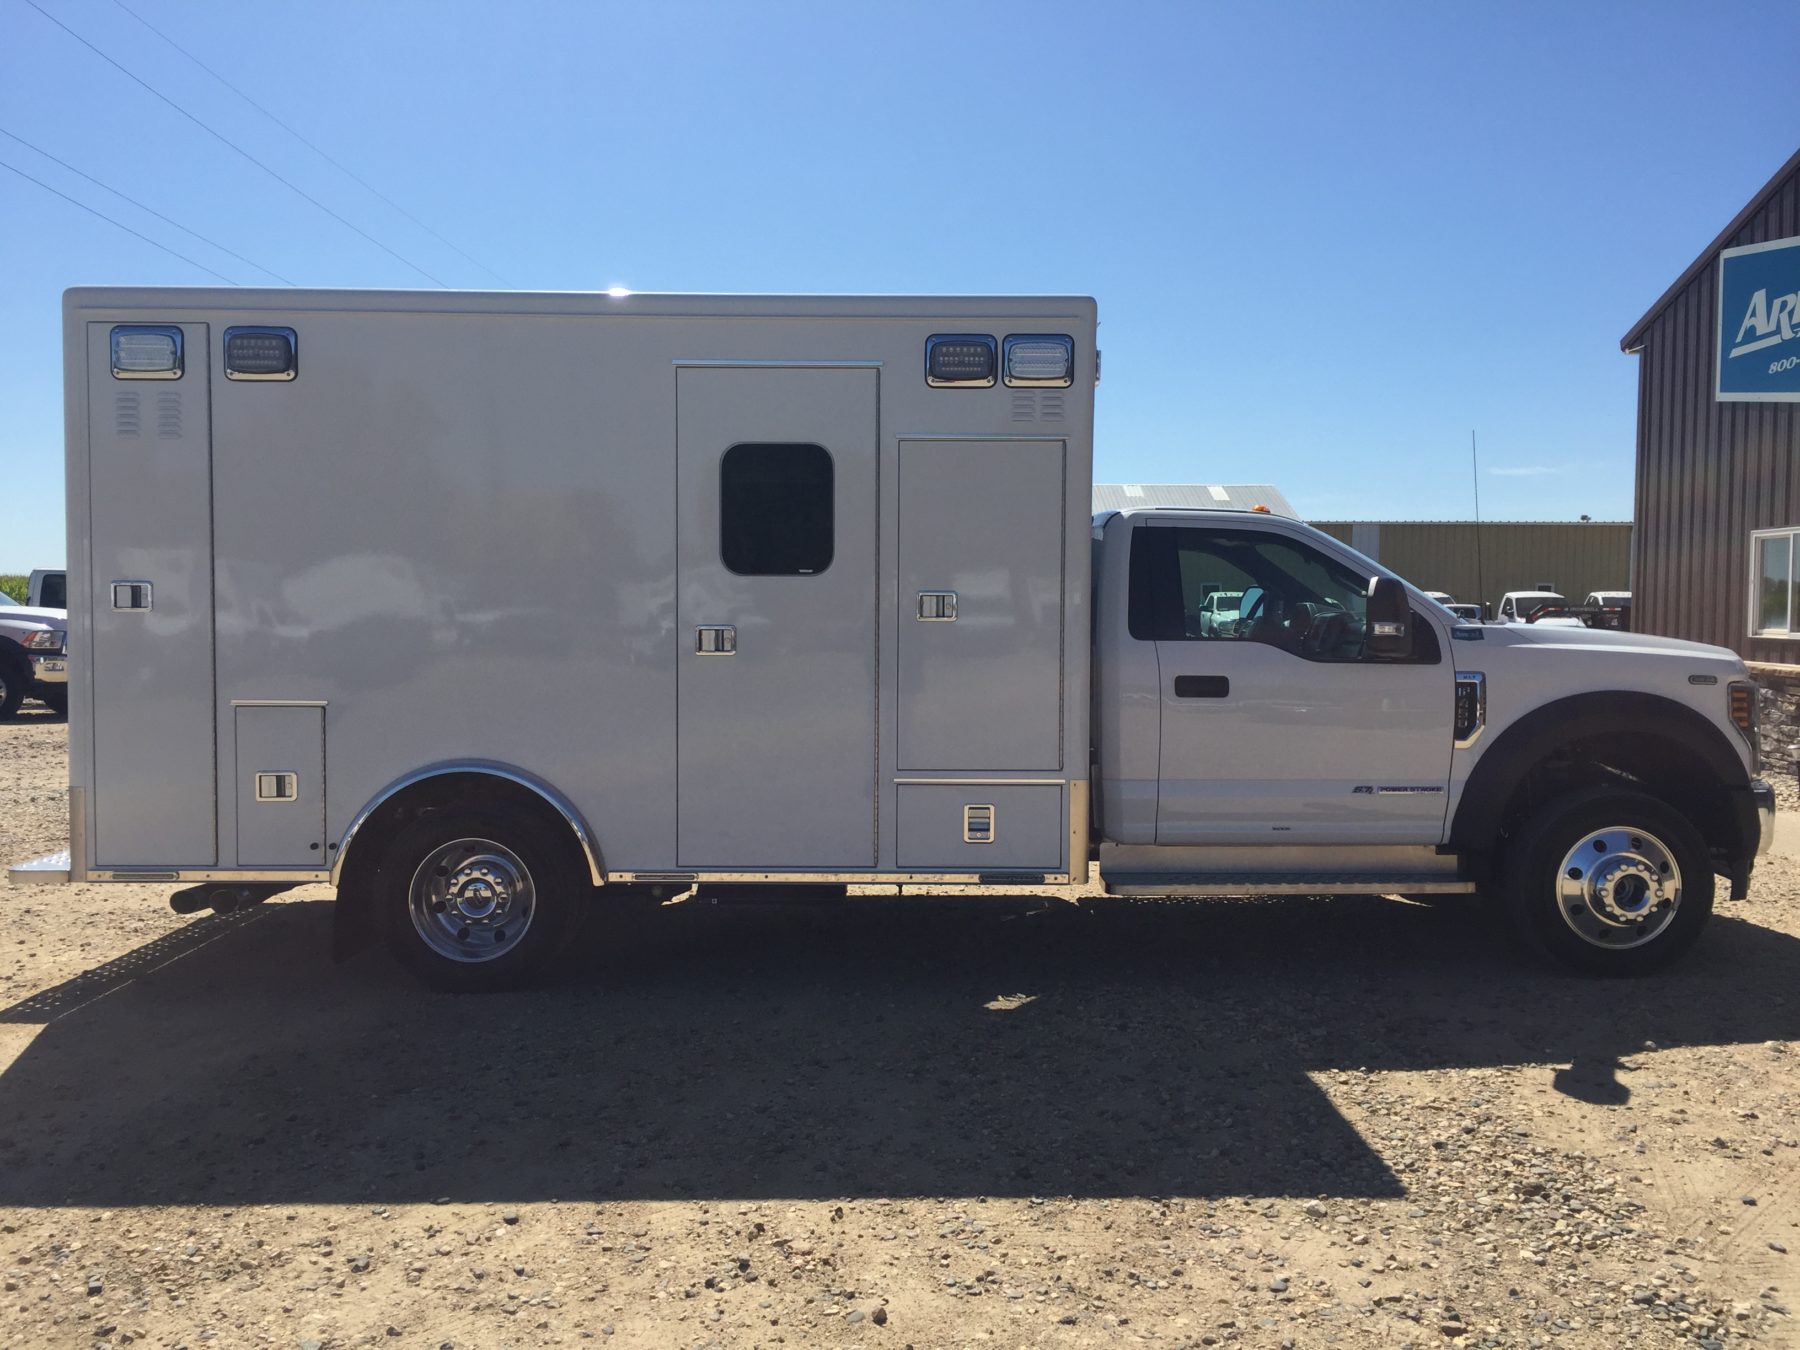 2019 Ford F450 4x4 Heavy Duty Ambulance For Sale – Picture 3